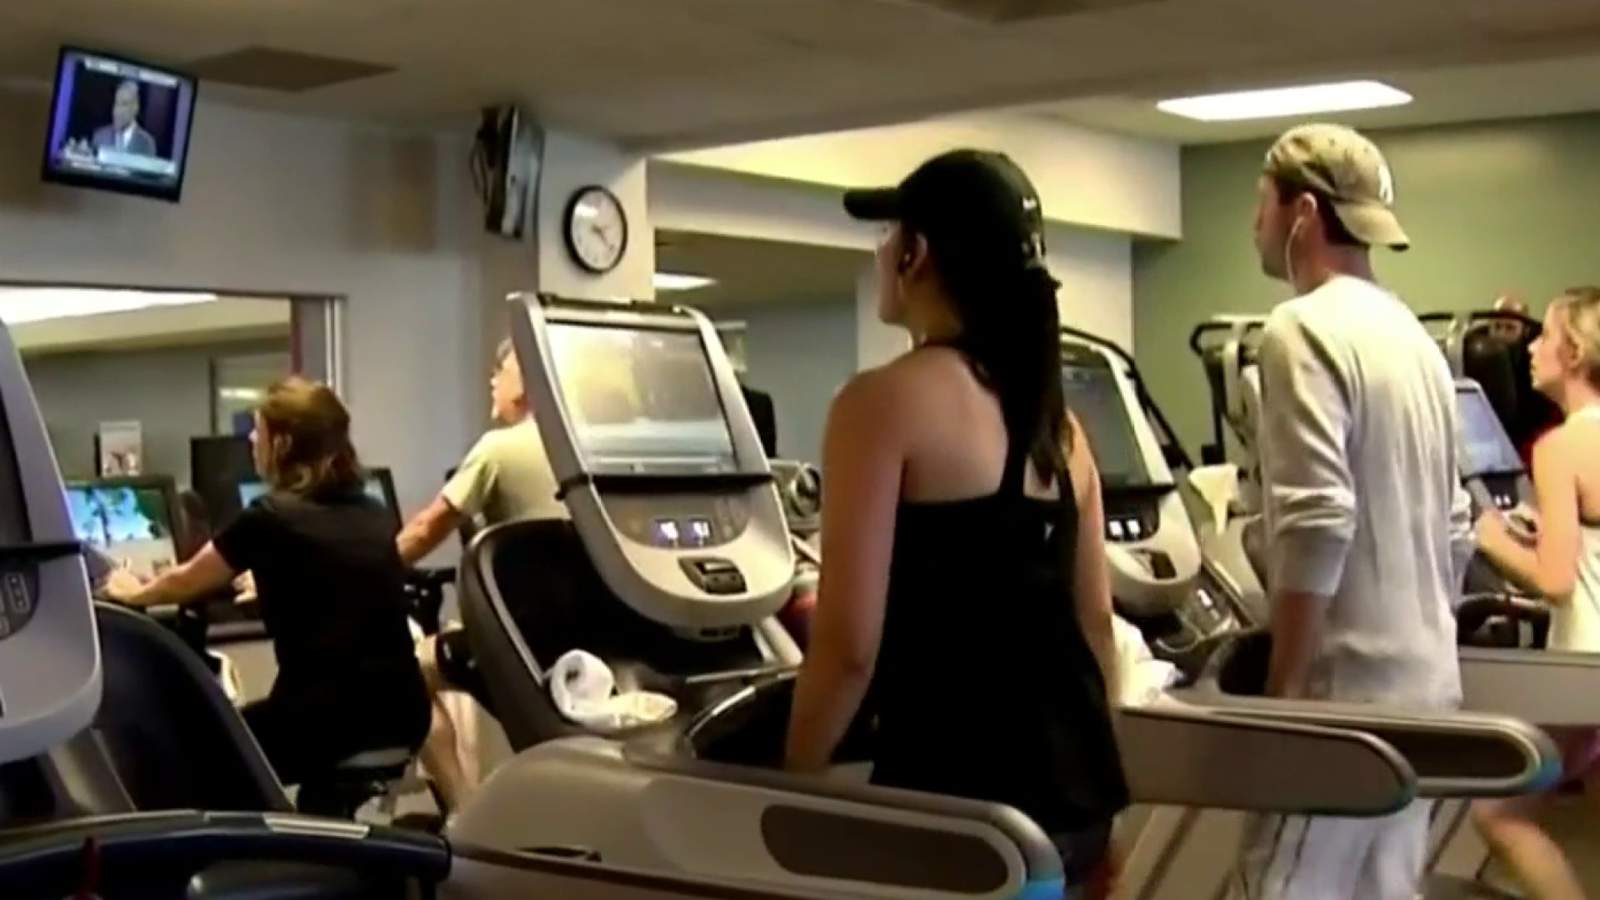 Michigan gym owners worried about future as home workouts become more popular during pandemic